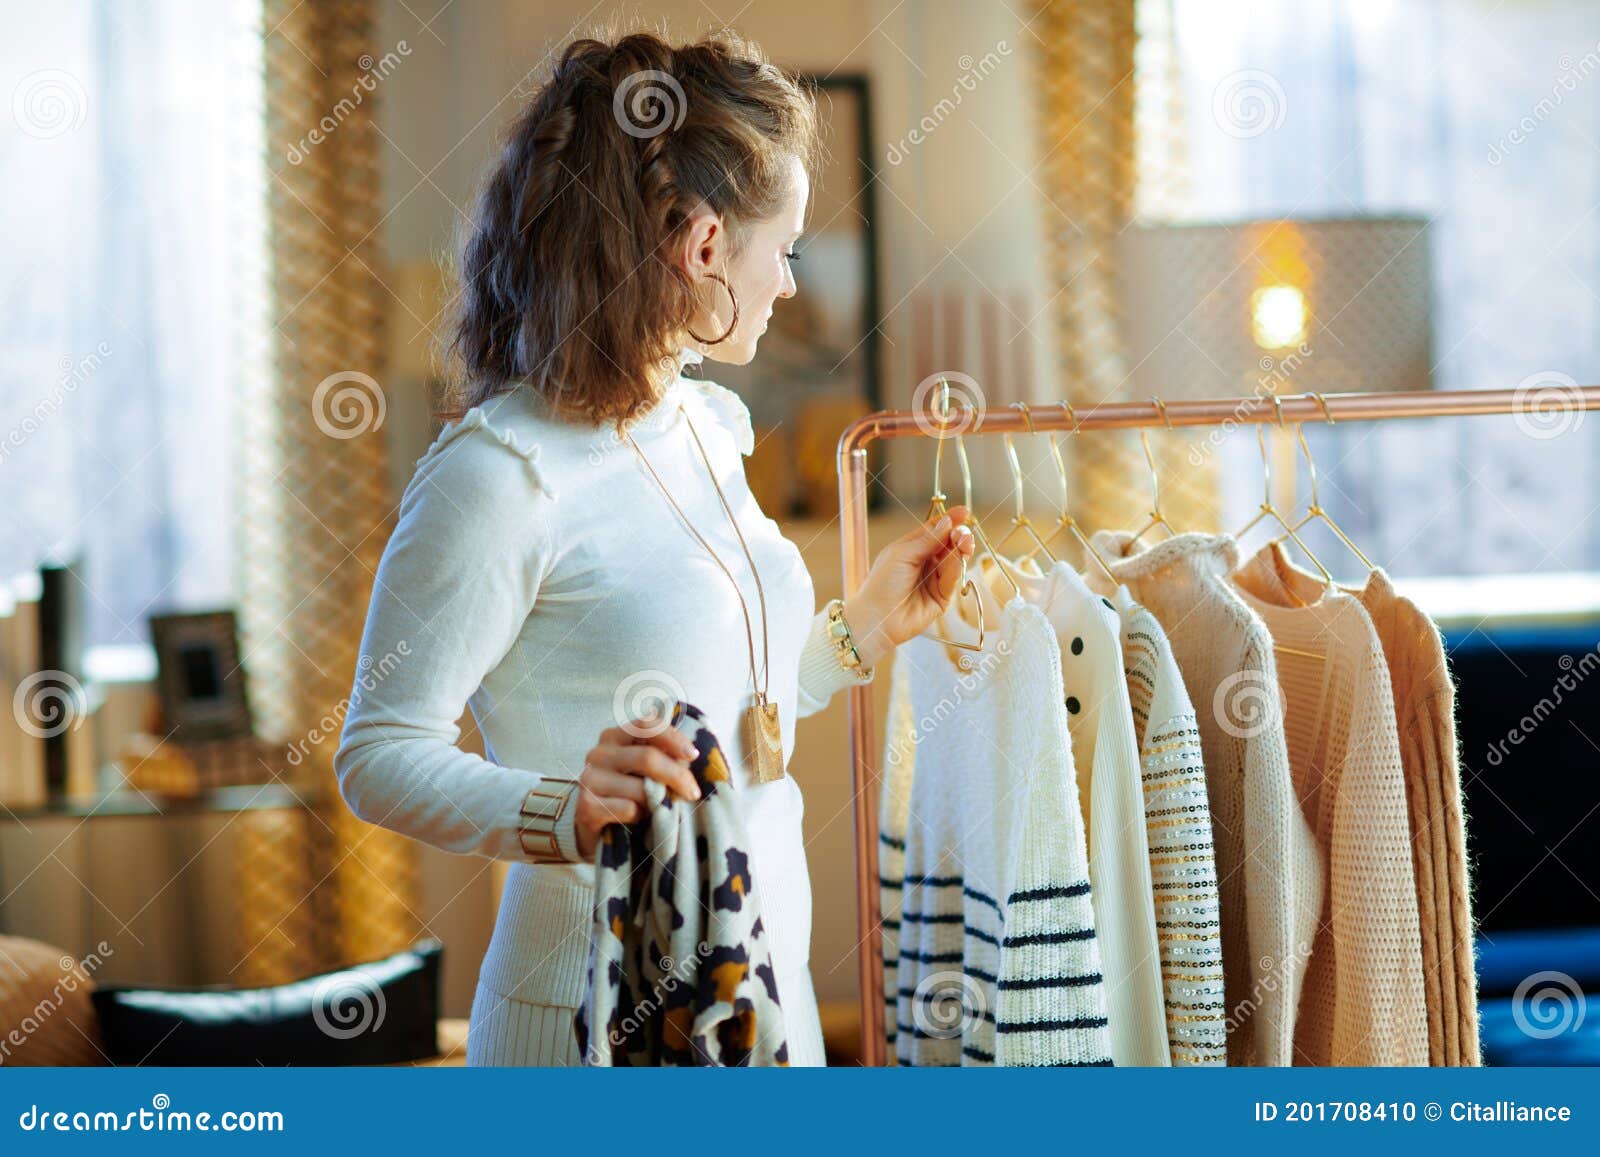 Elegant Housewife Choosing Sweaters Hanging on Clothes Rack Stock Photo ...